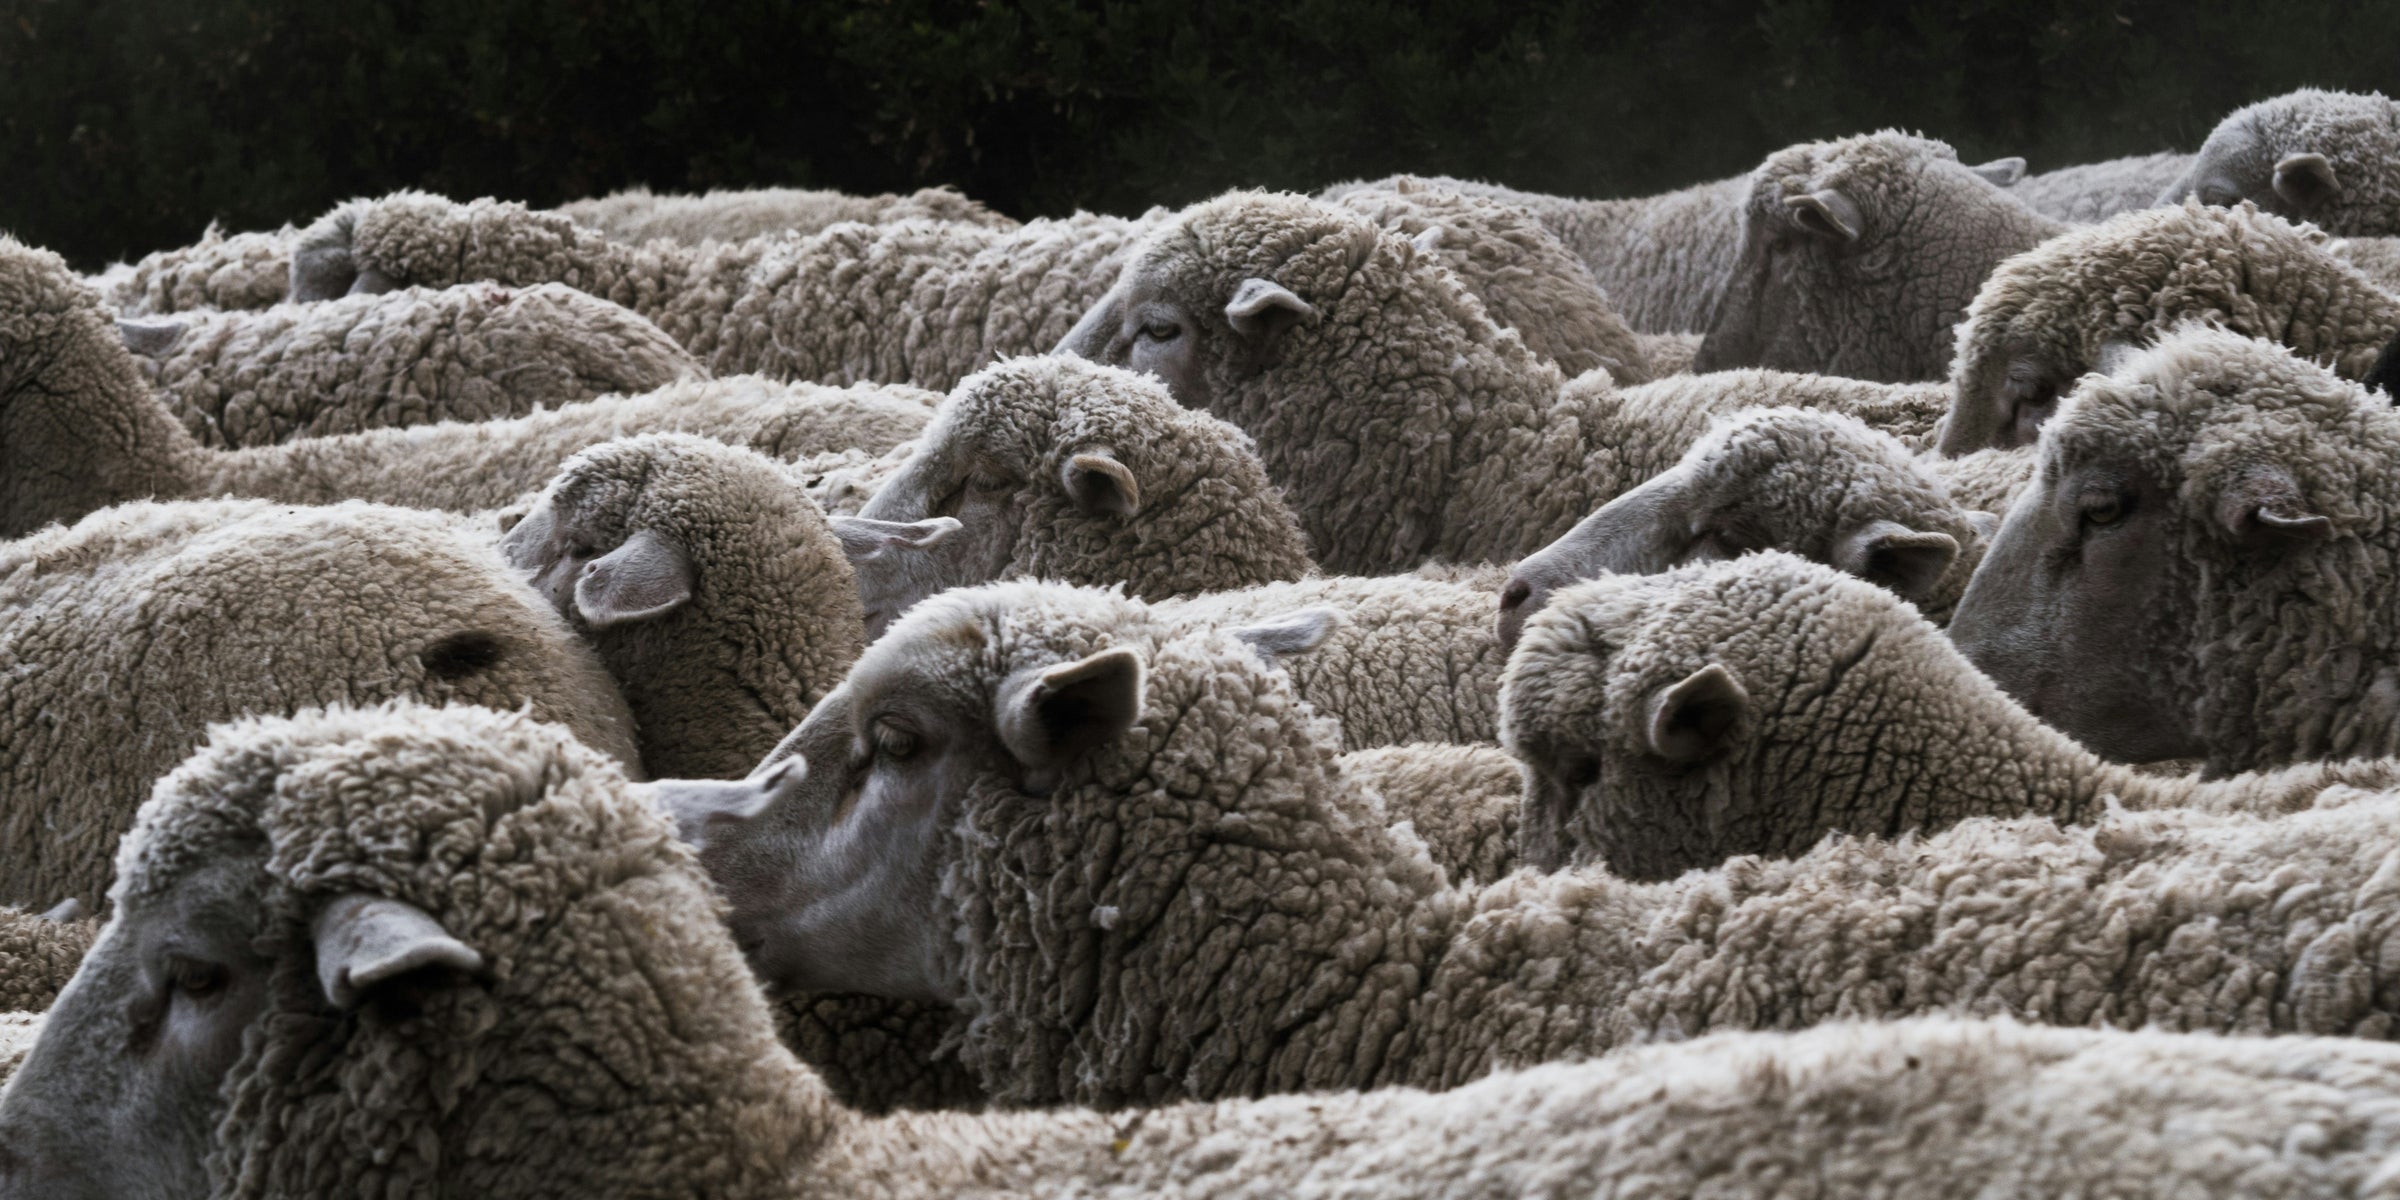 Soft, light and ecological: the virtues of merino wool in detail